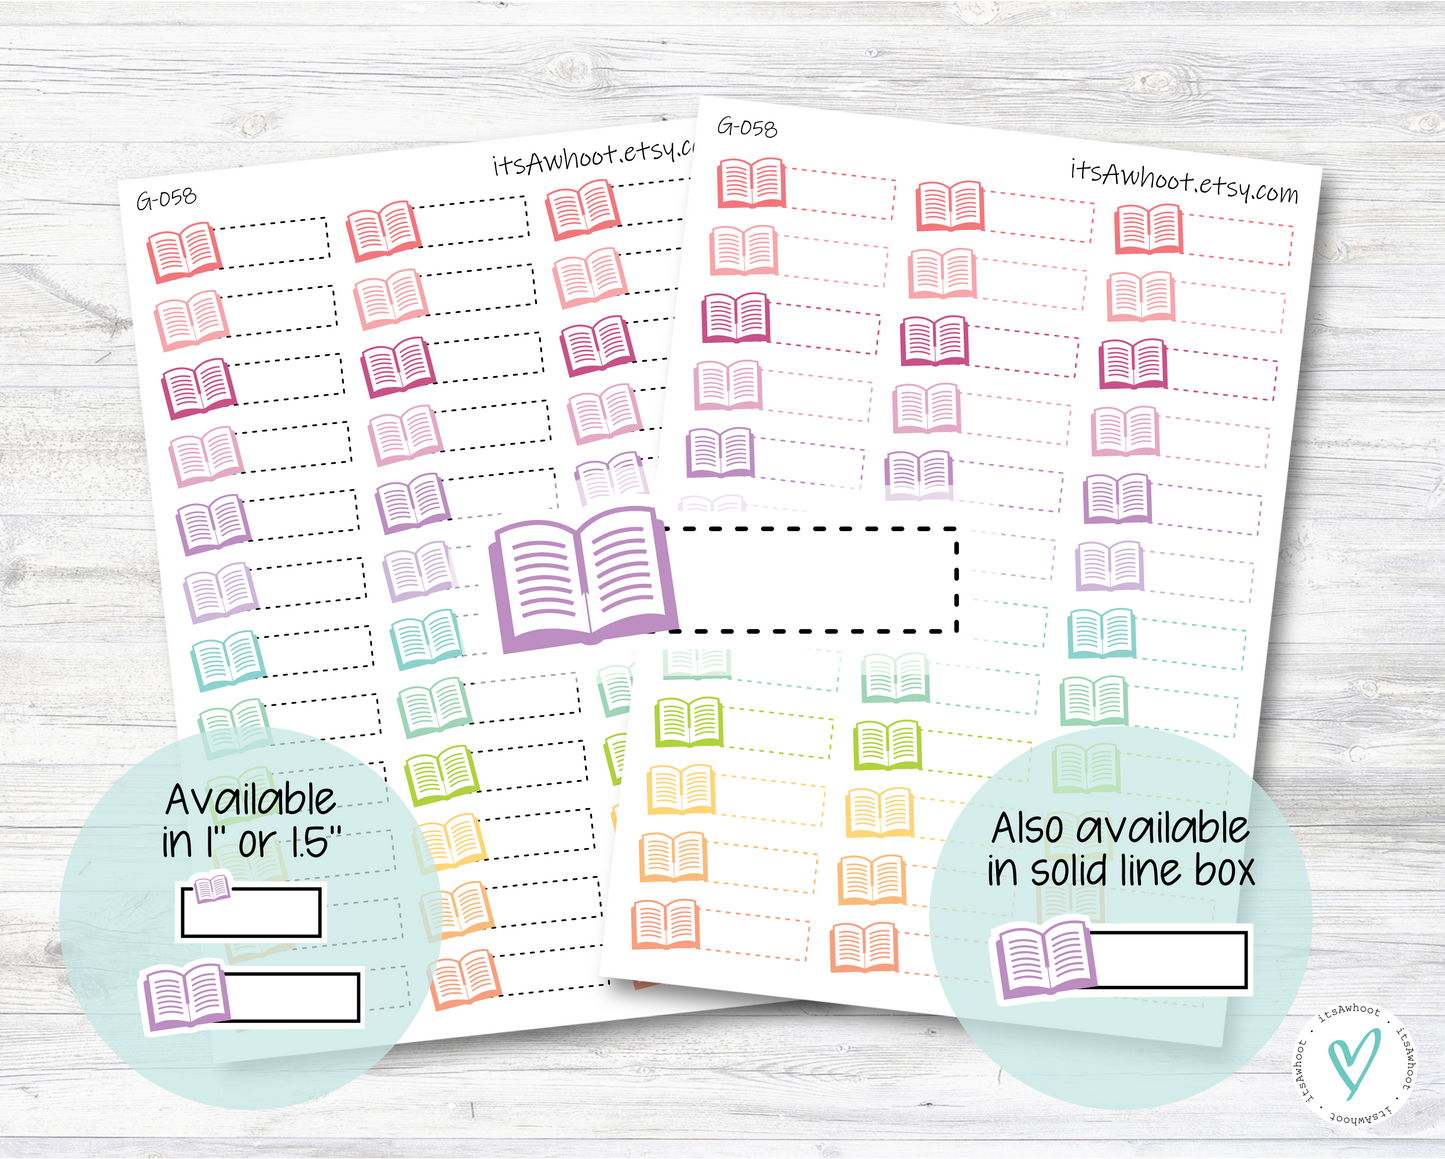 Book / Read Quarter Box Label Planner Stickers - Dash or Solid / One Inch or 1.5" Inch (G058)